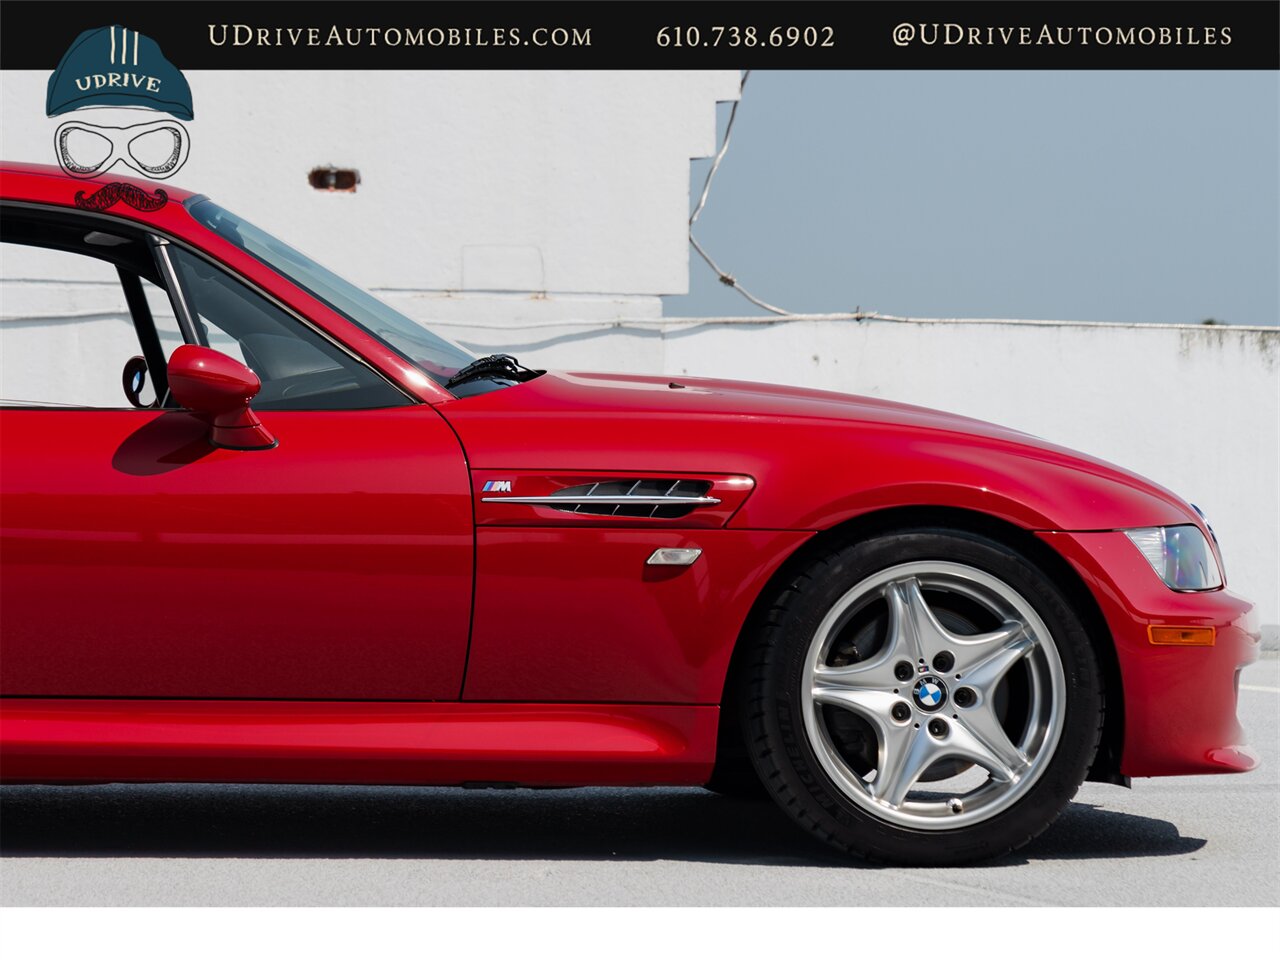 2000 BMW Z3 M  Coupe 25k Miles  Sunroof Delete $4k Recent Service - Photo 16 - West Chester, PA 19382